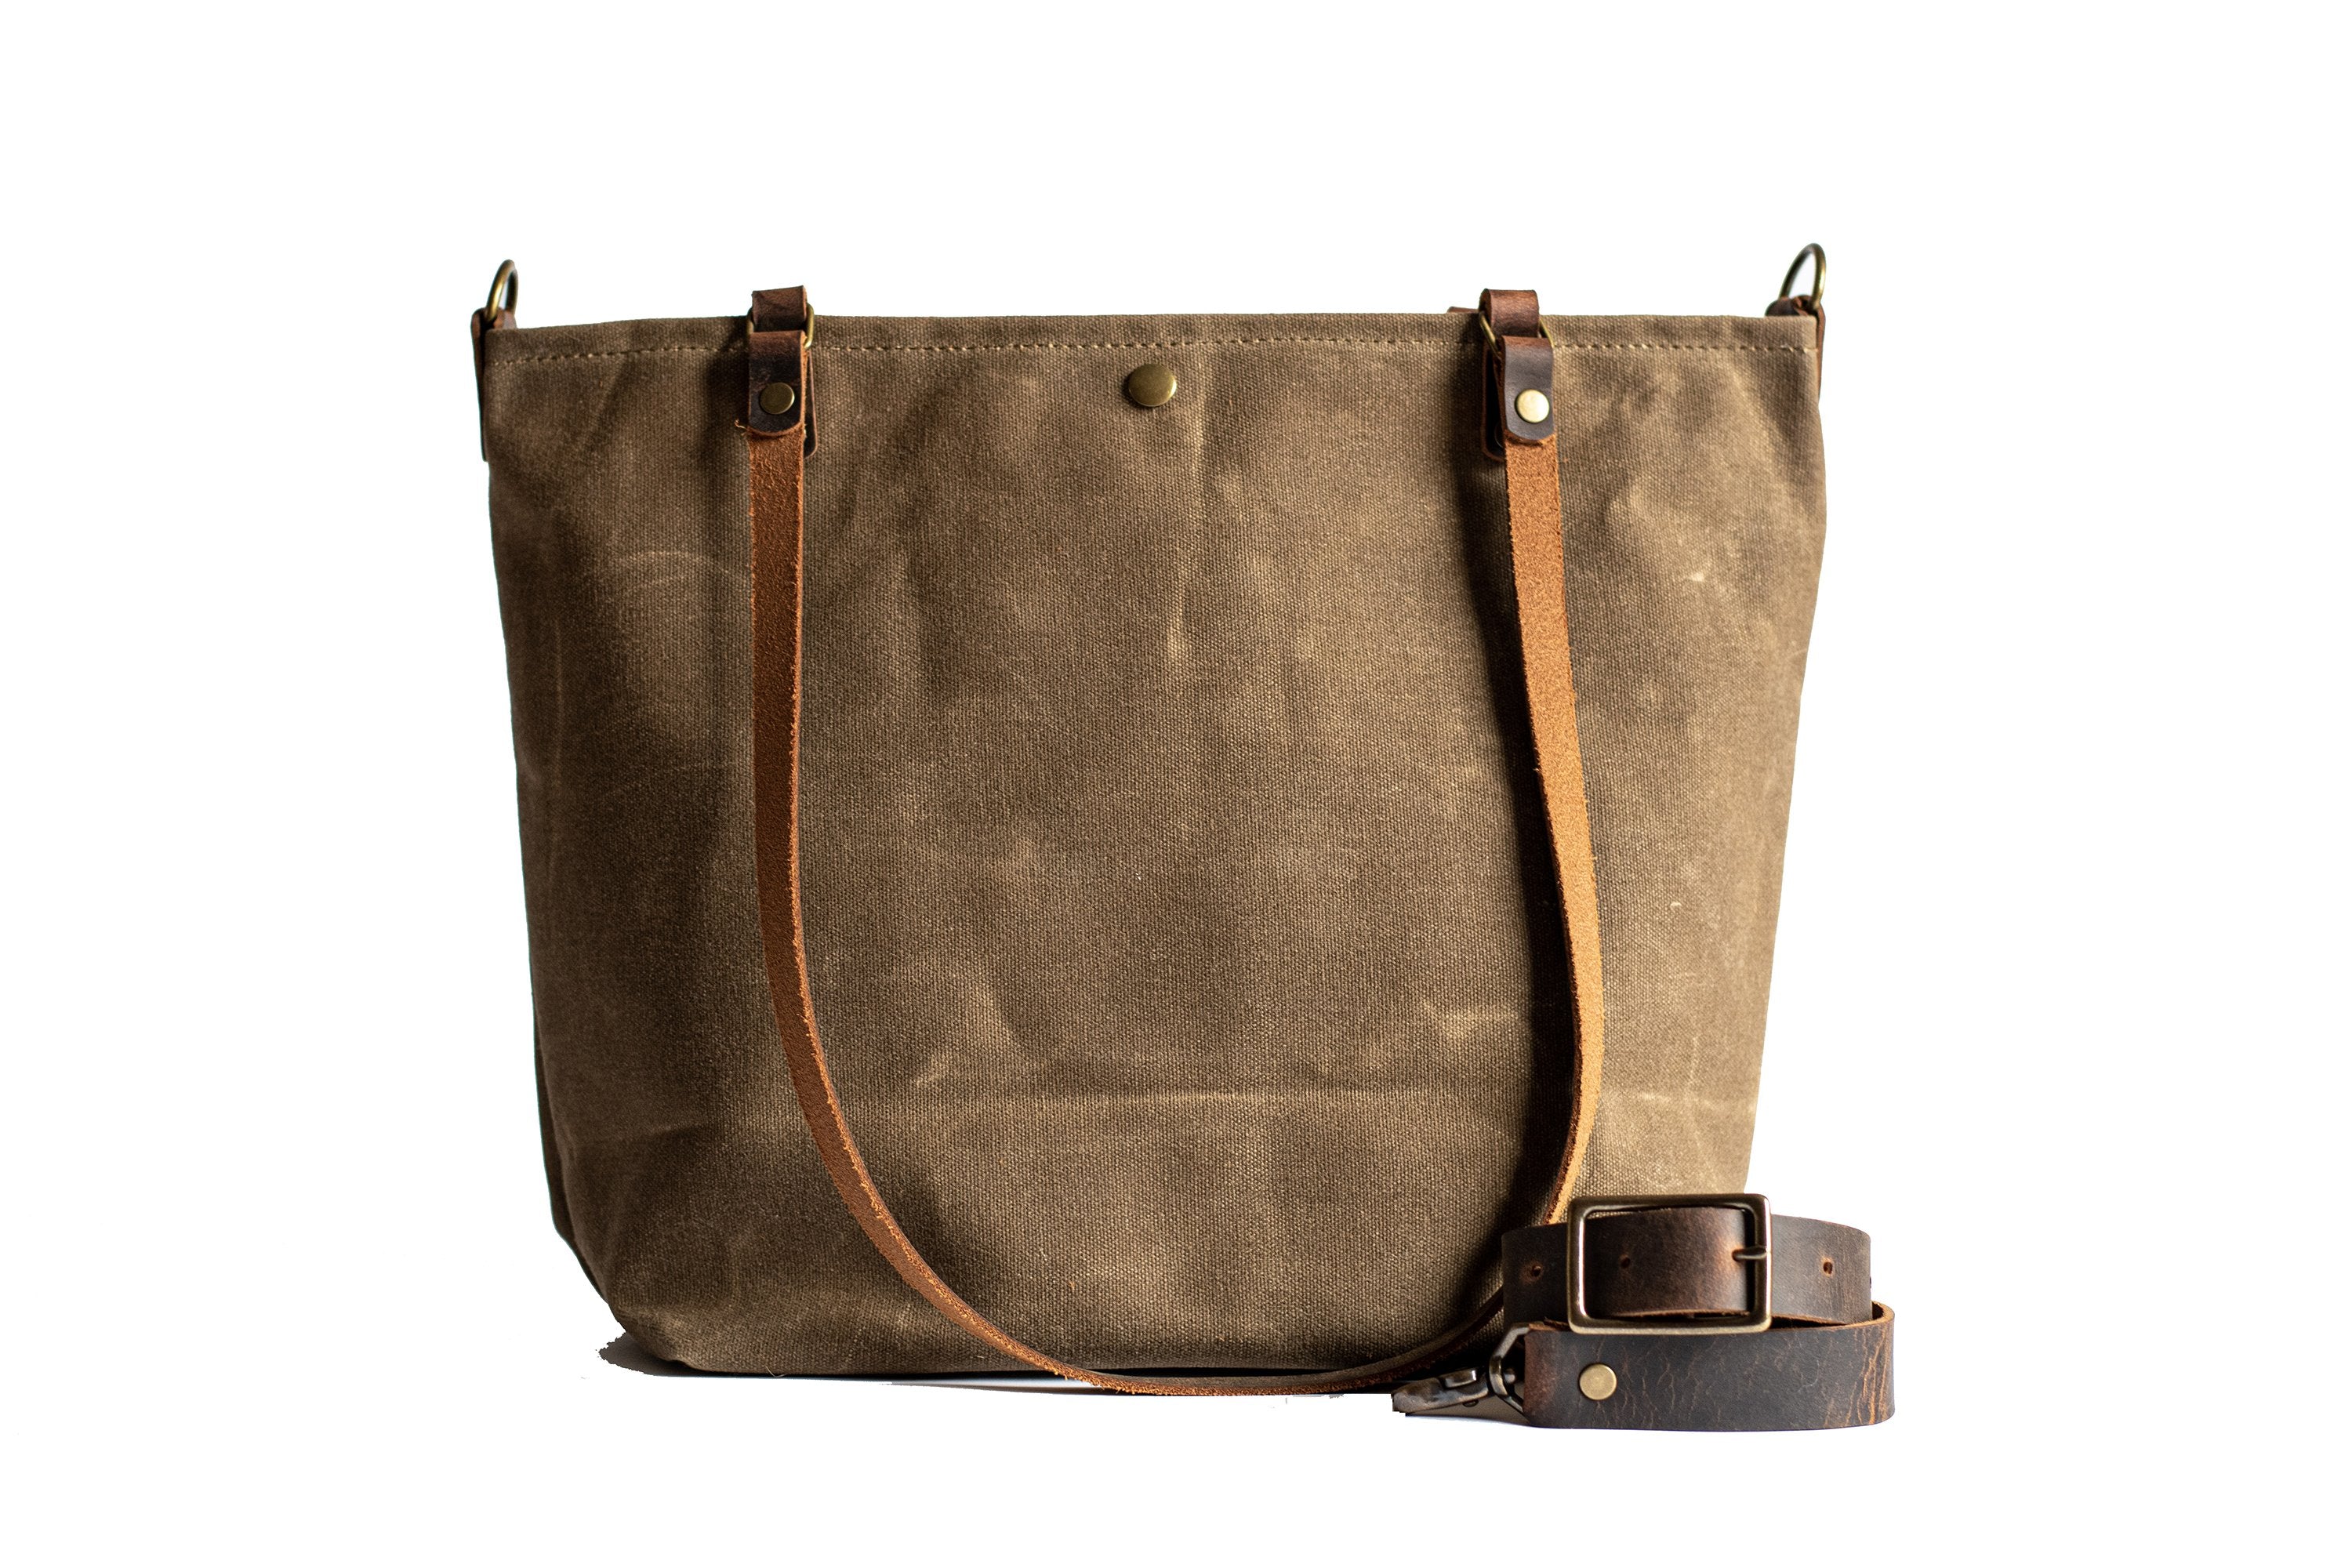 Twig & Horn - Introducing the new Waxed Canvas Crossbody Tote! Available in  olive or navy, the Waxed Canvas Crossbody Tote is more than just a project  bag. Made in the USA,